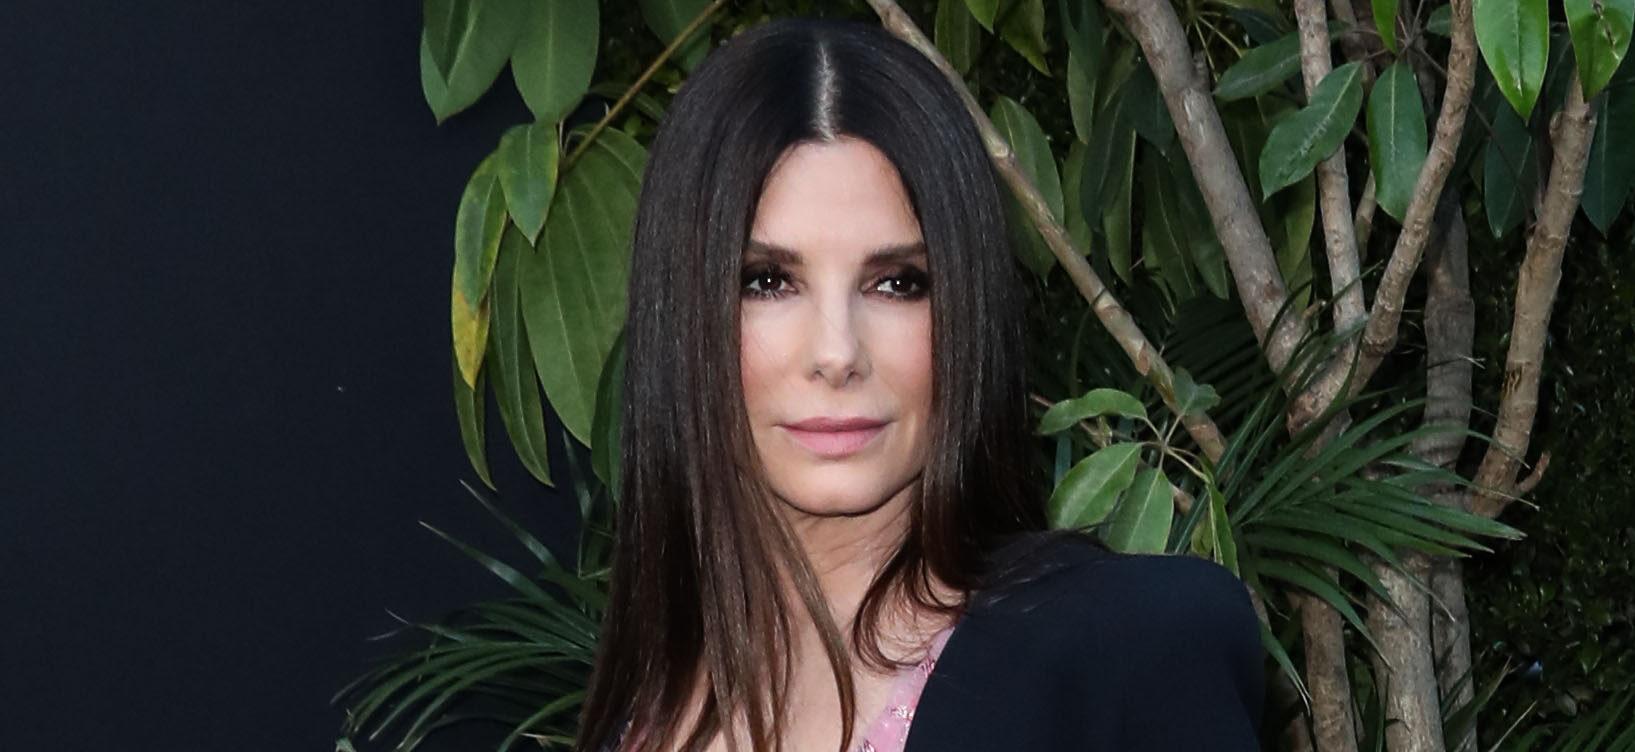 Sandra Bullock ‘Is So Grateful’ For Support After ‘Heartbreaking’ Passing Of Her Partner Bryan Randall